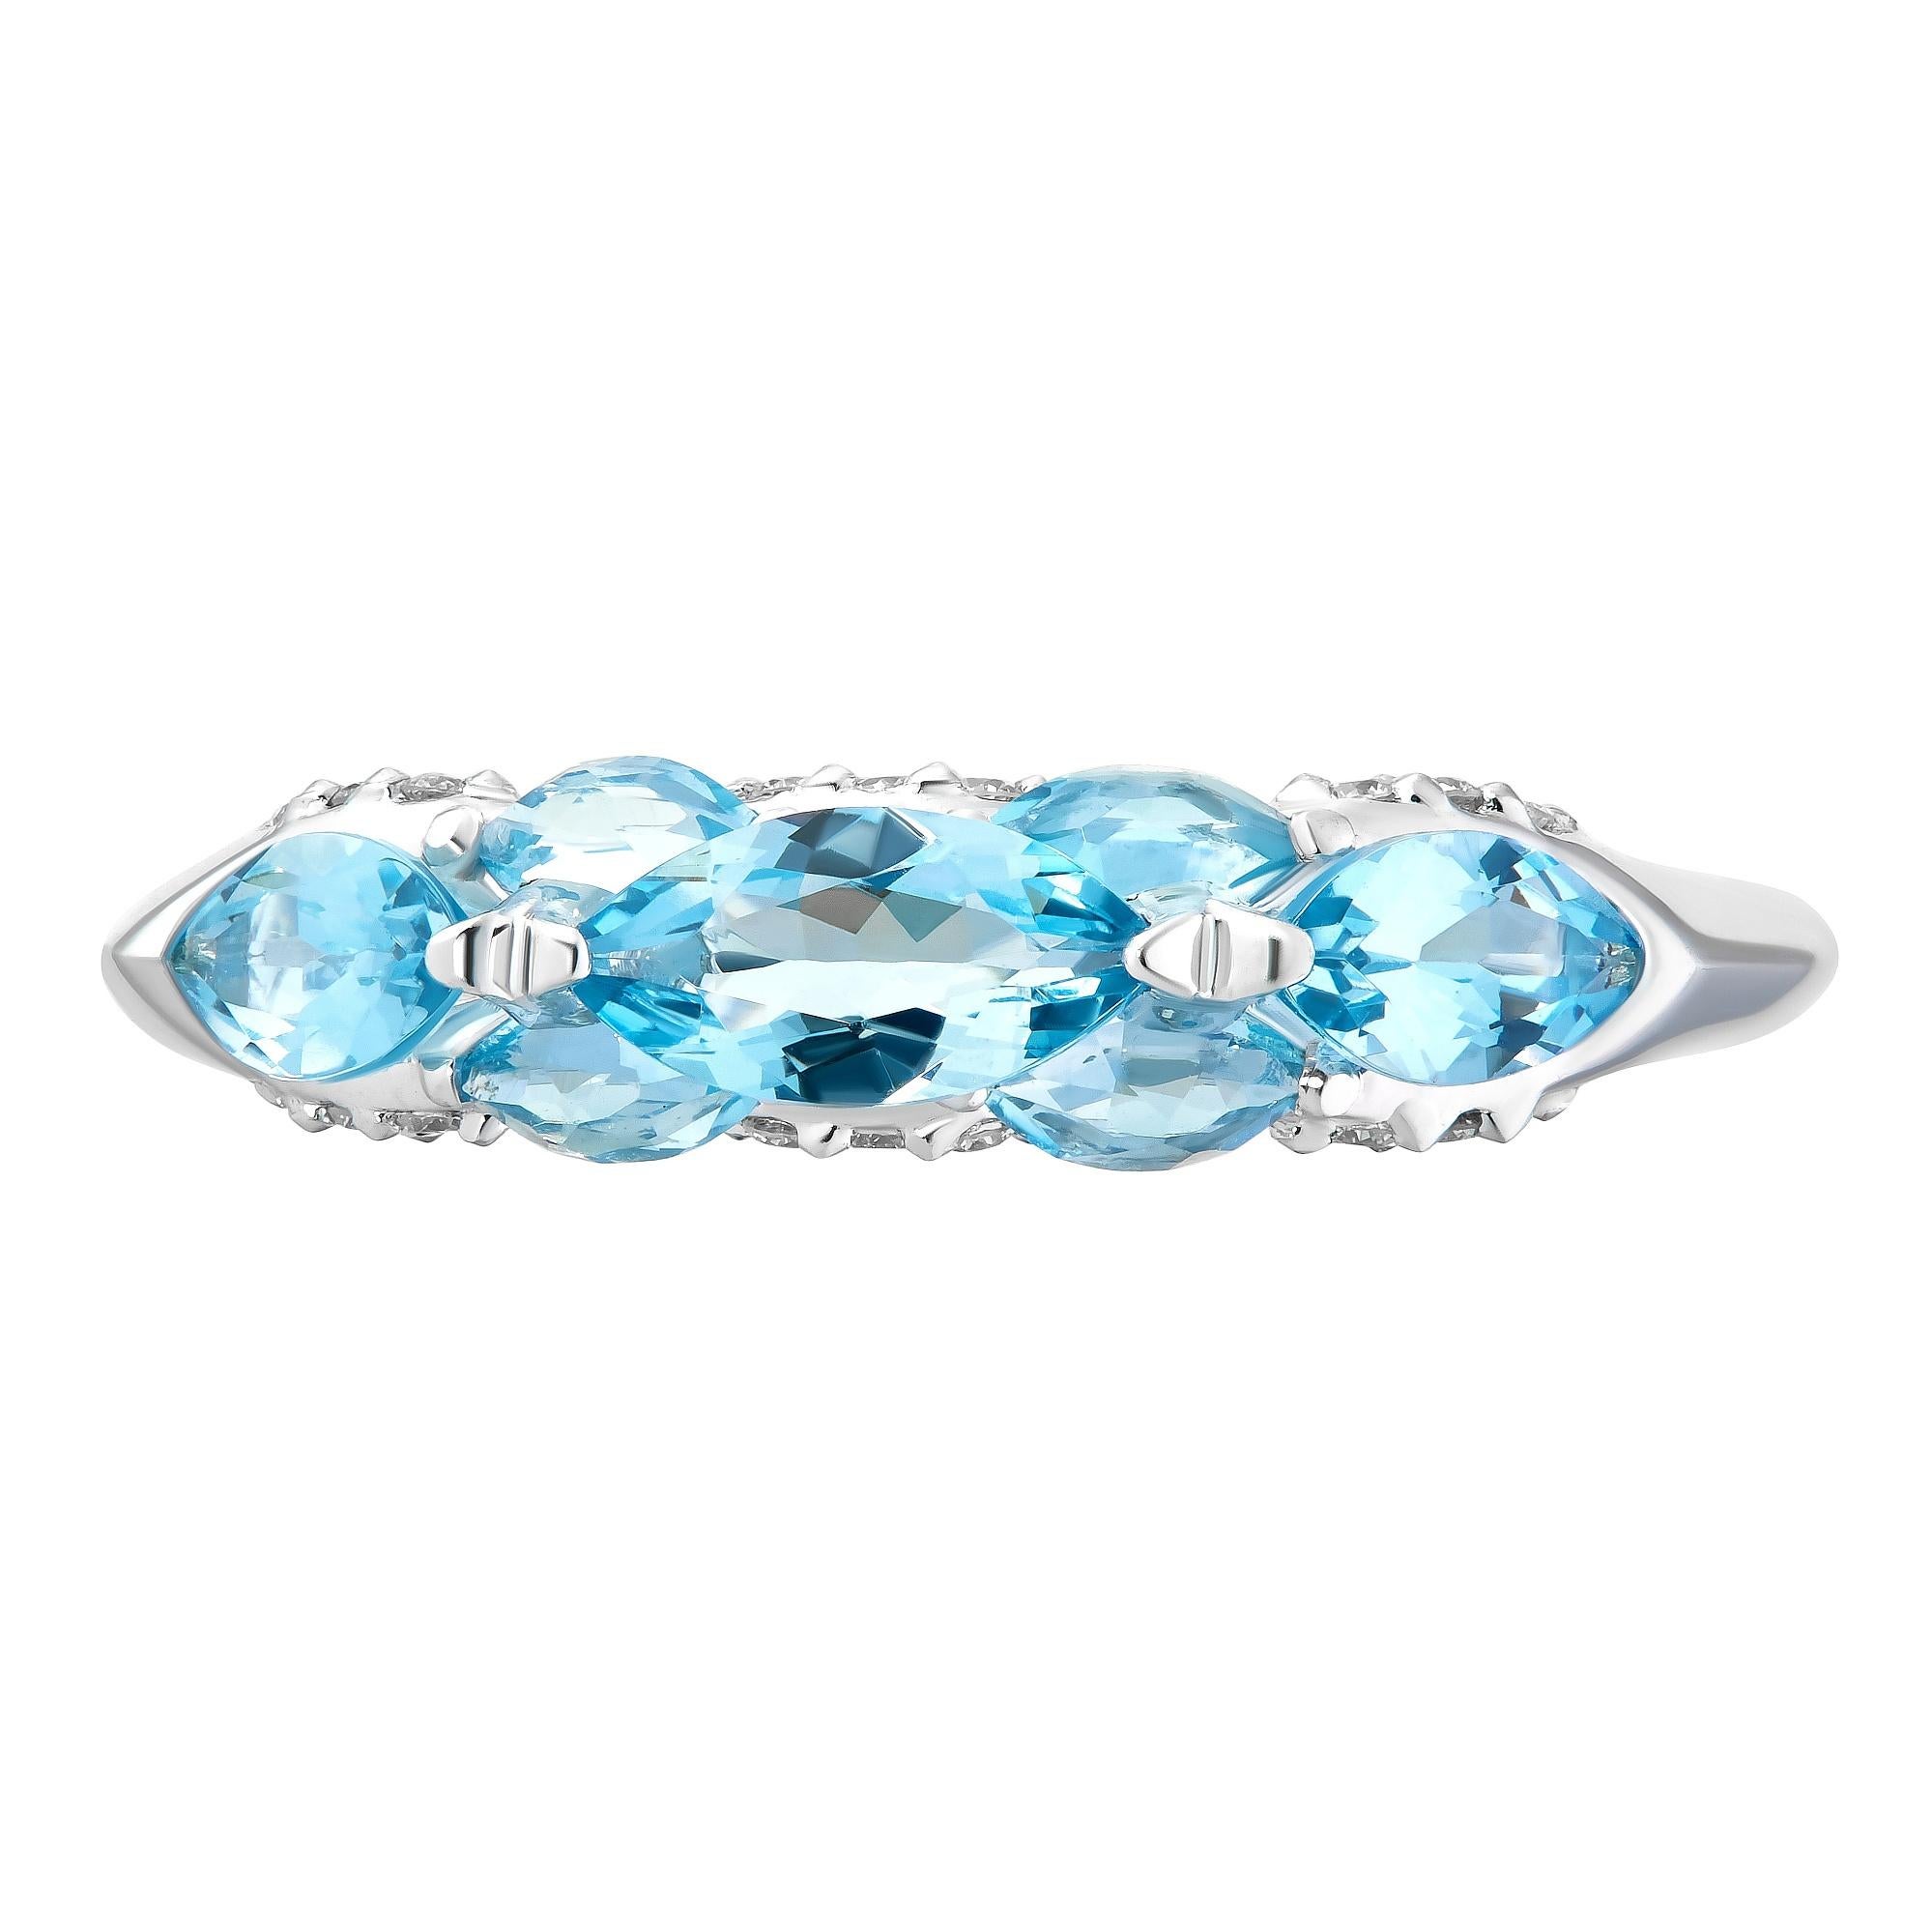 The exquisite ring from the MOISEIKIN's Harmony collection is made of Santa Maria Aquamarines and shimmering diamonds.
The lightful harmony of aquamarines mounted in traditional and unique reverse settings creates intensive energy of water,